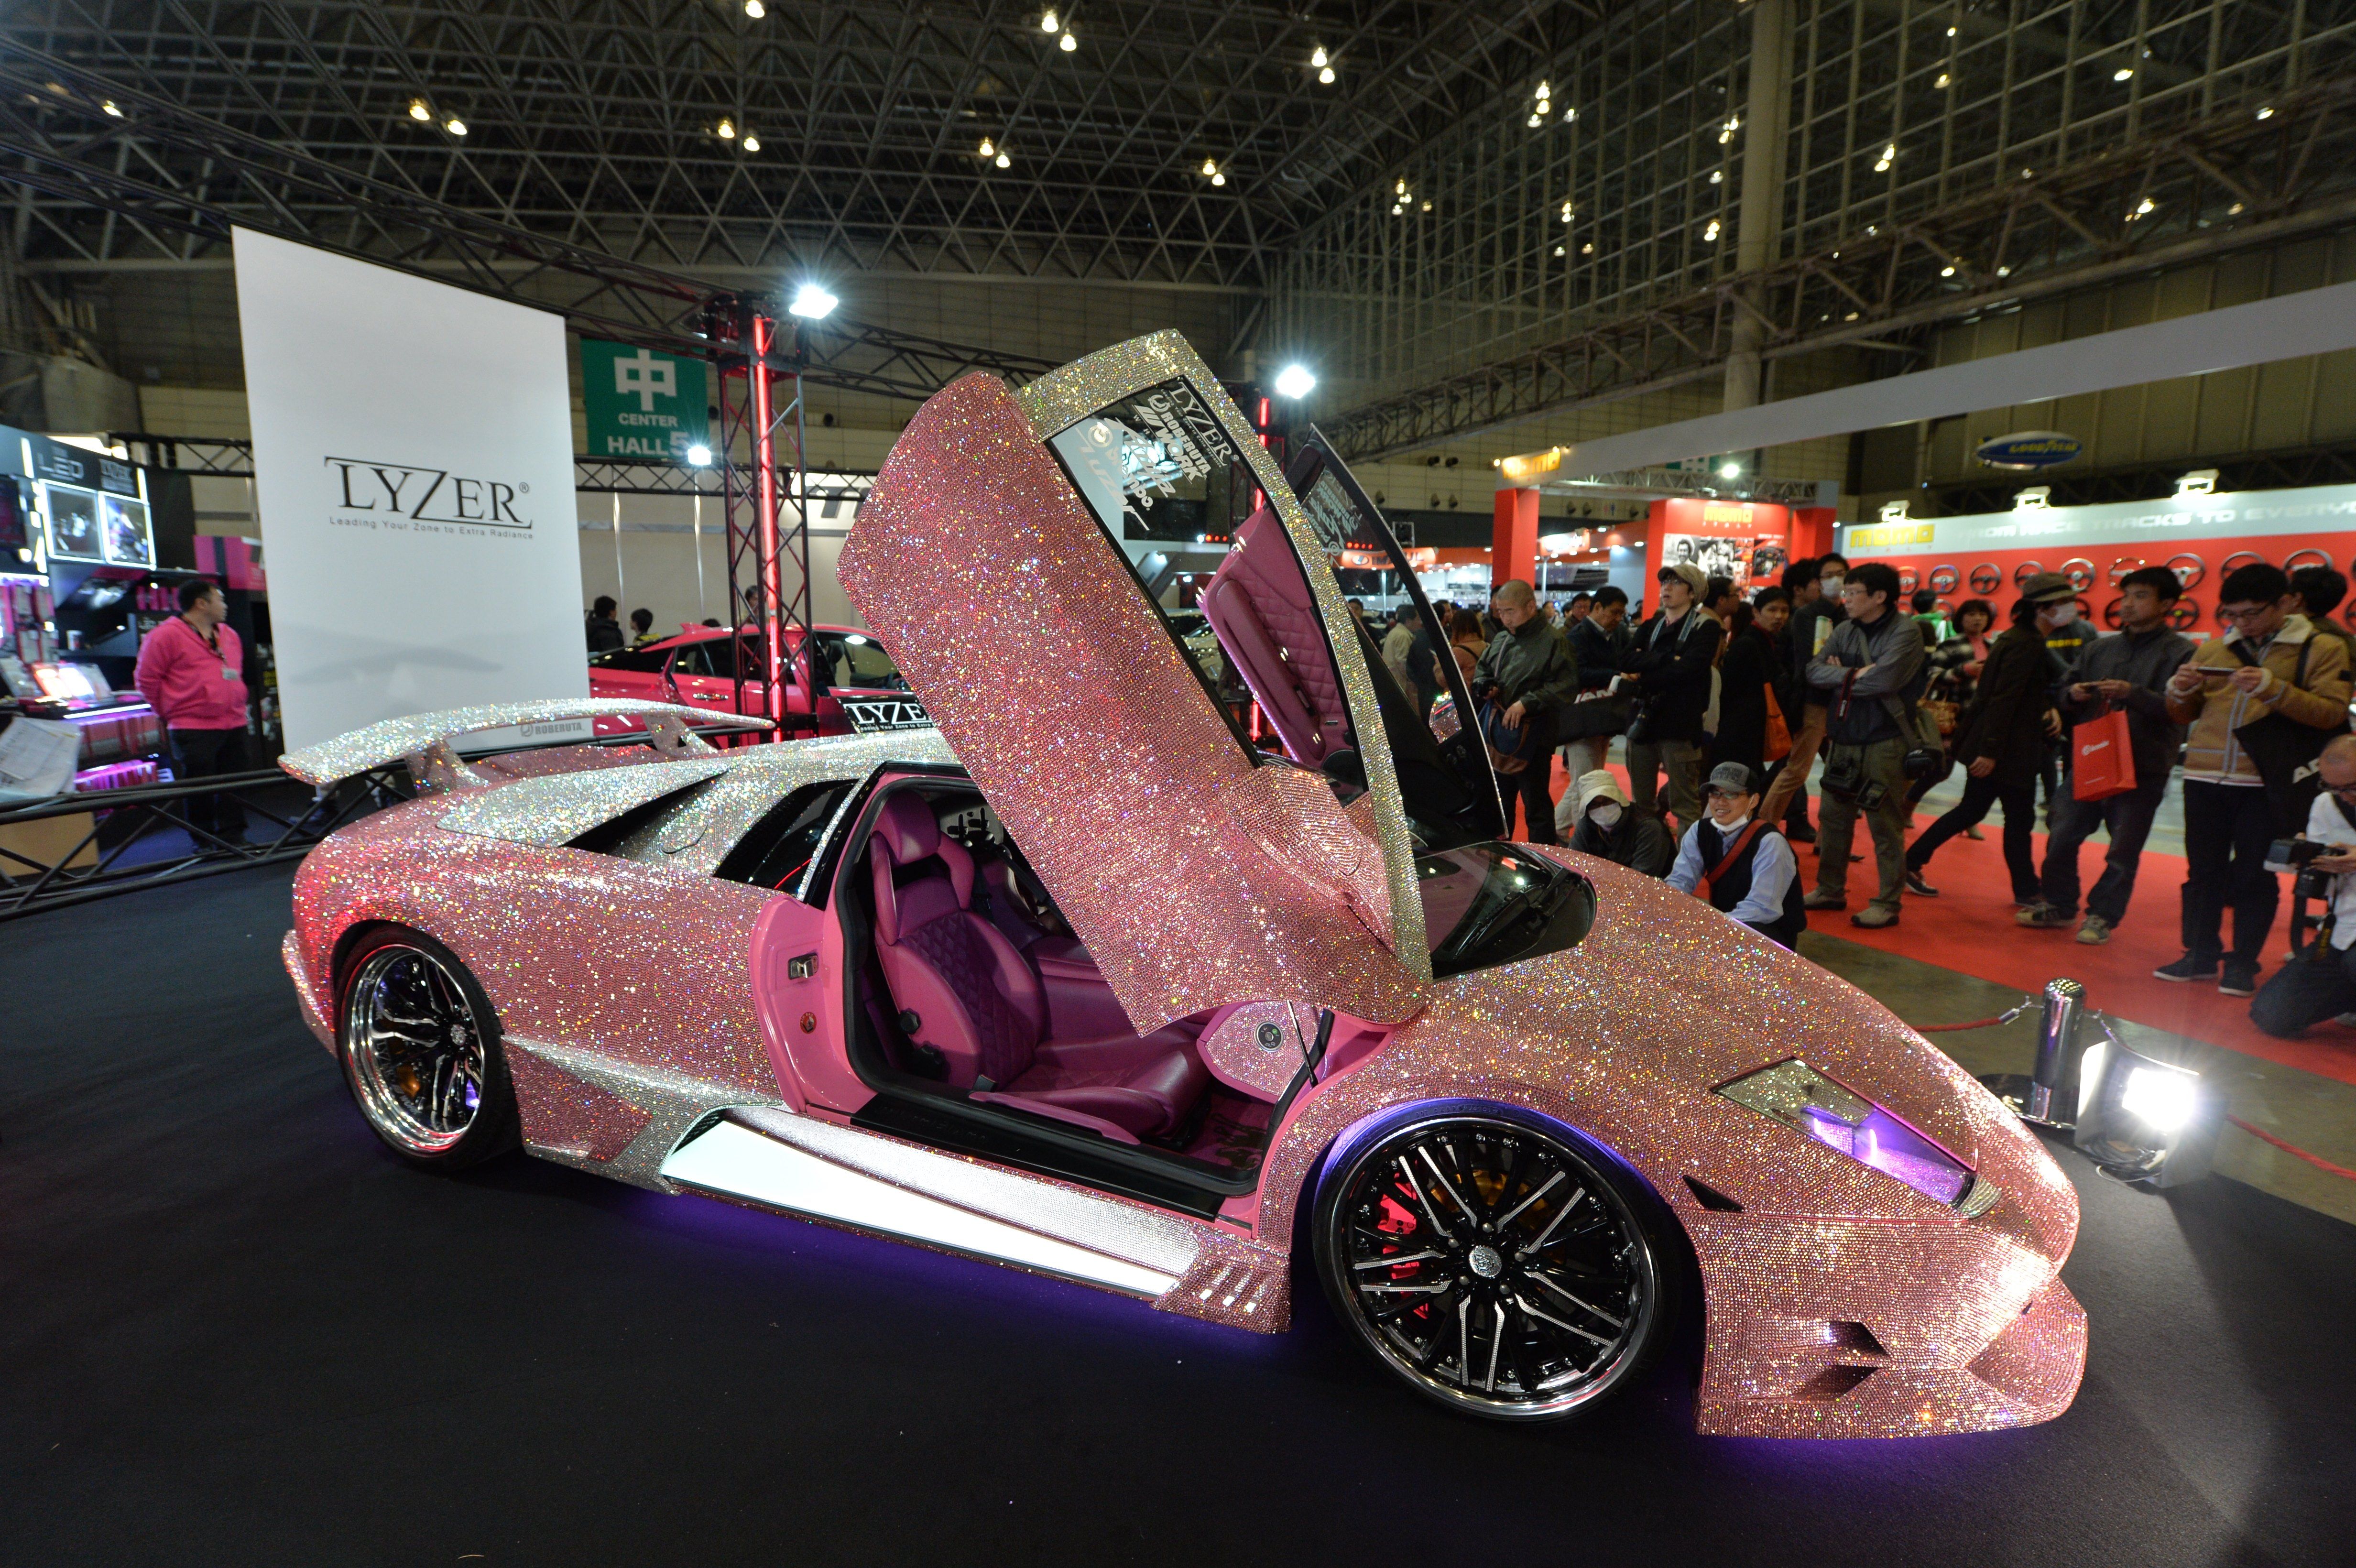 Swarovski-Crystal-Covered Lamborghinis and You: A Reality Check